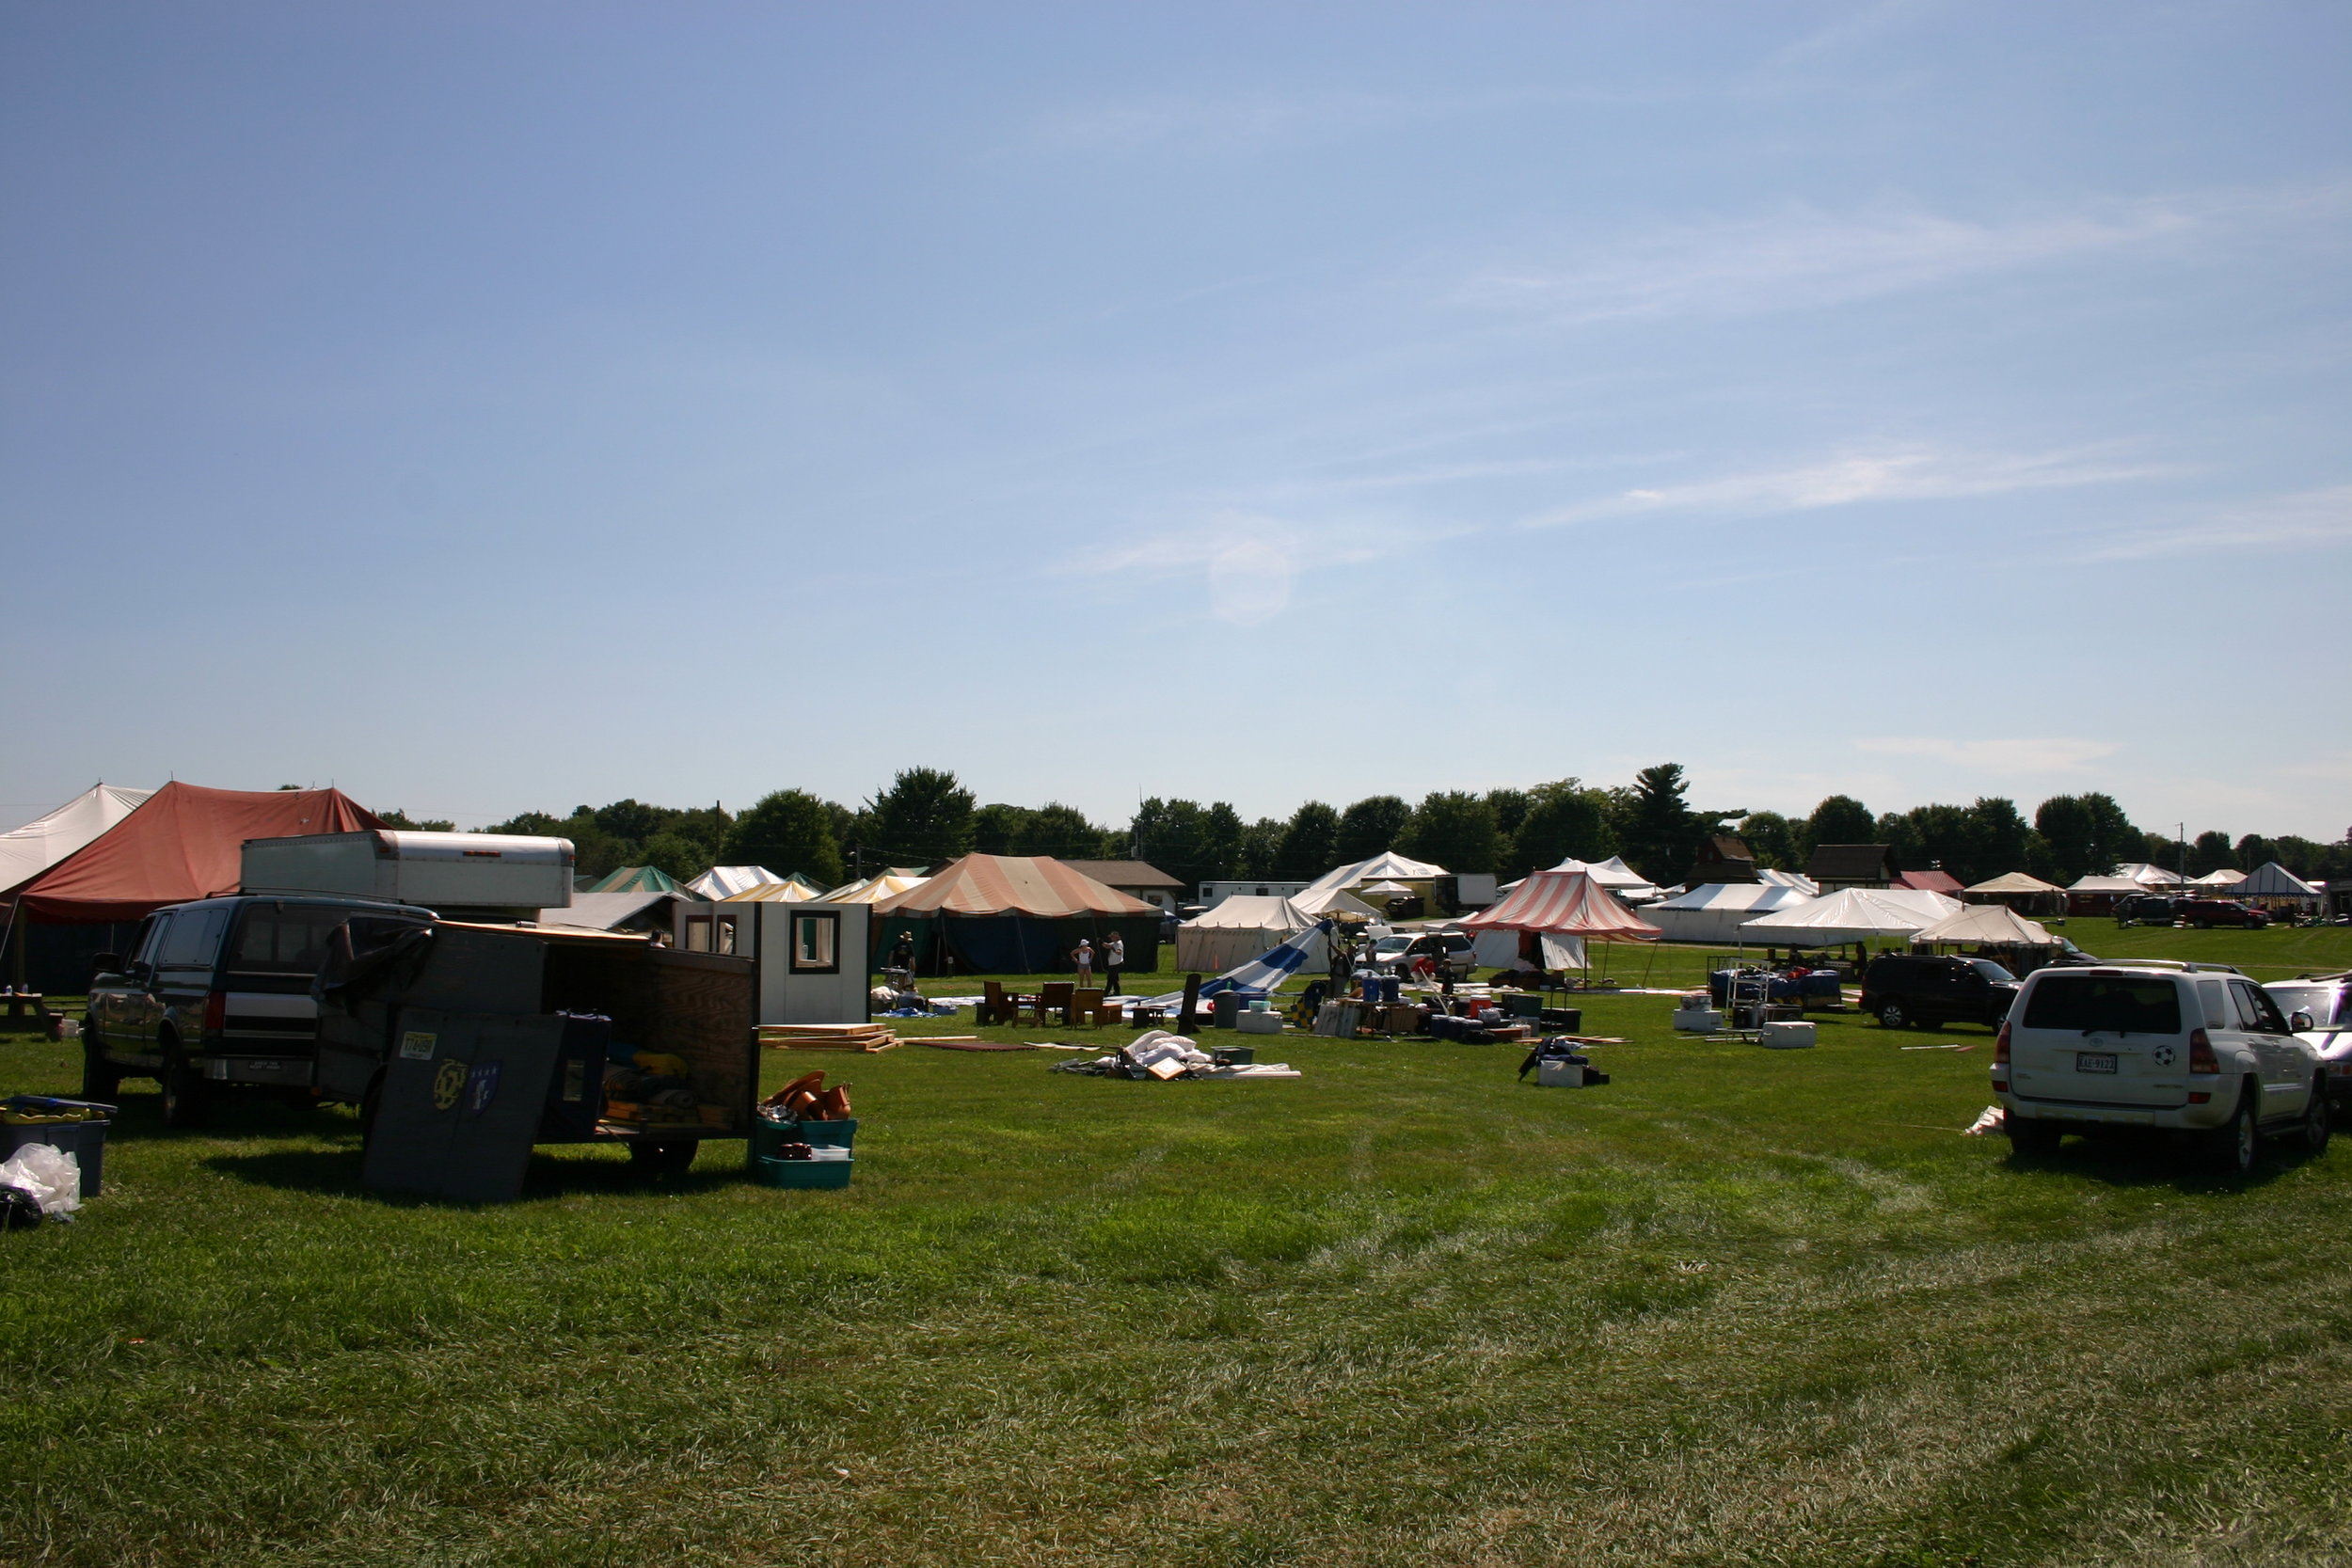 Rent Pennsic camping tents